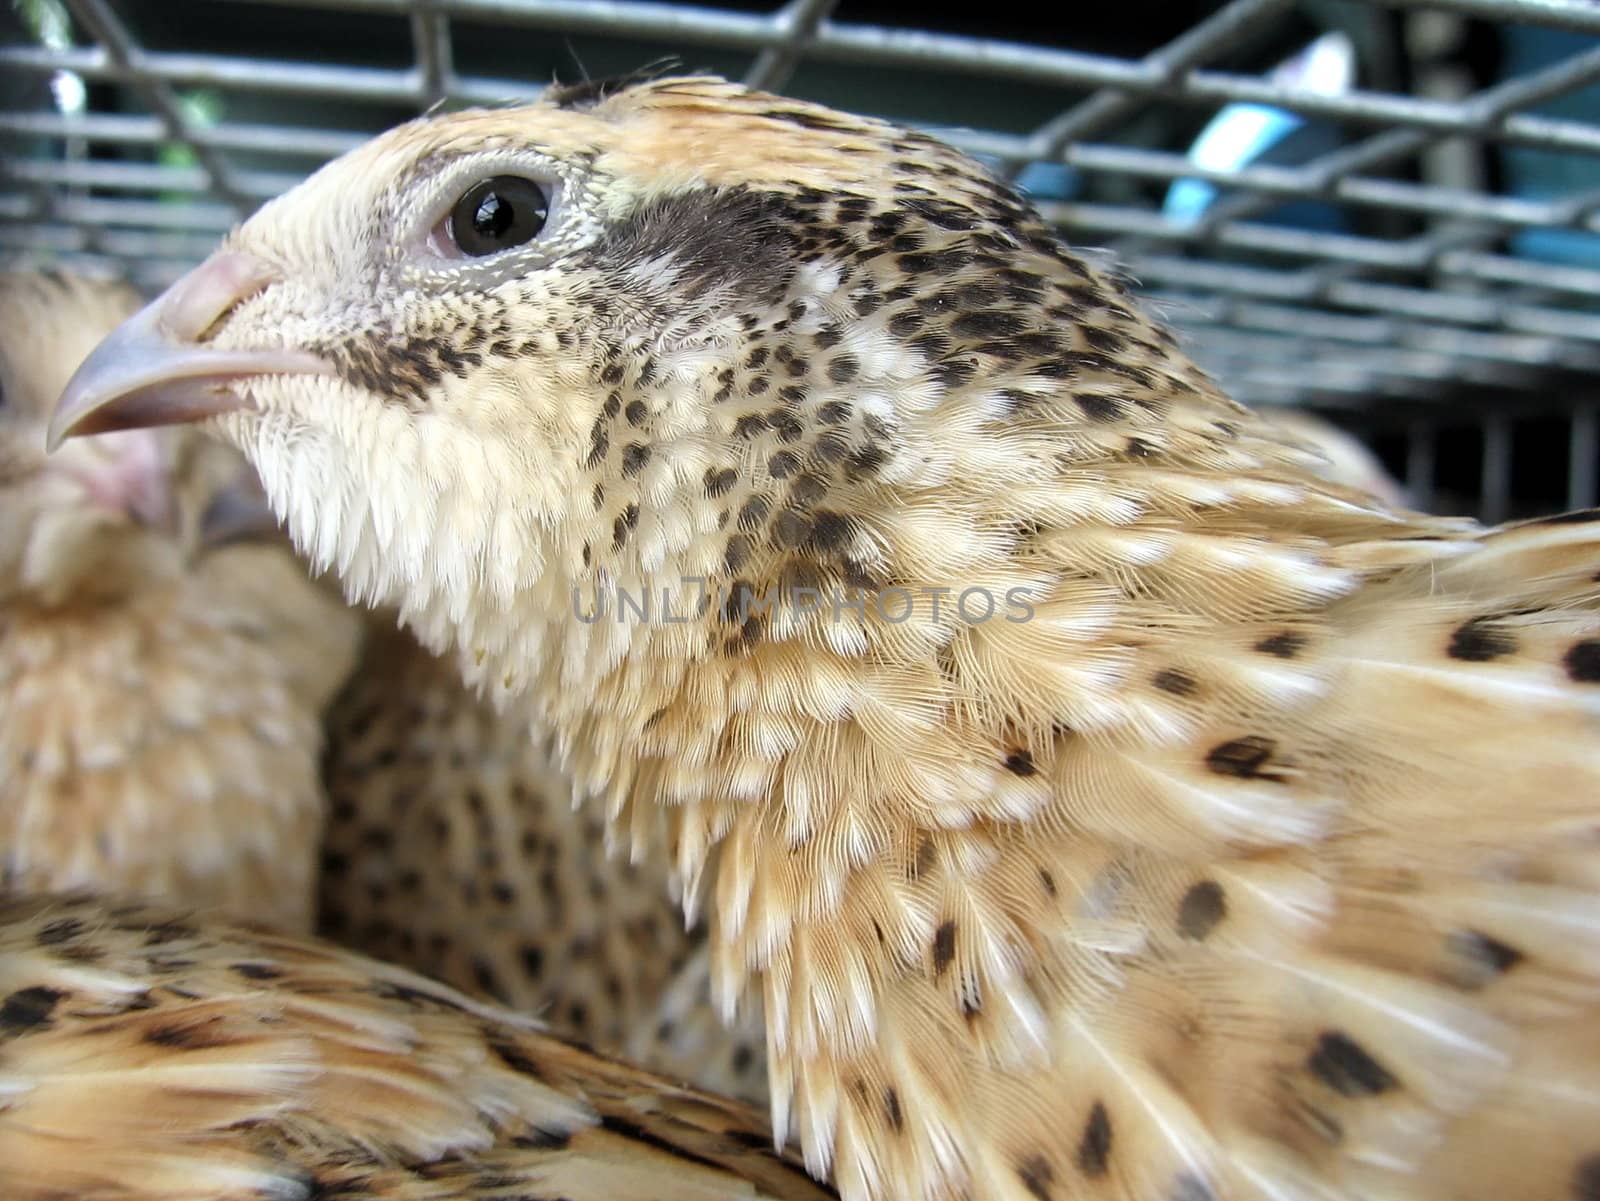 Nice quail sits in the crate for carrying